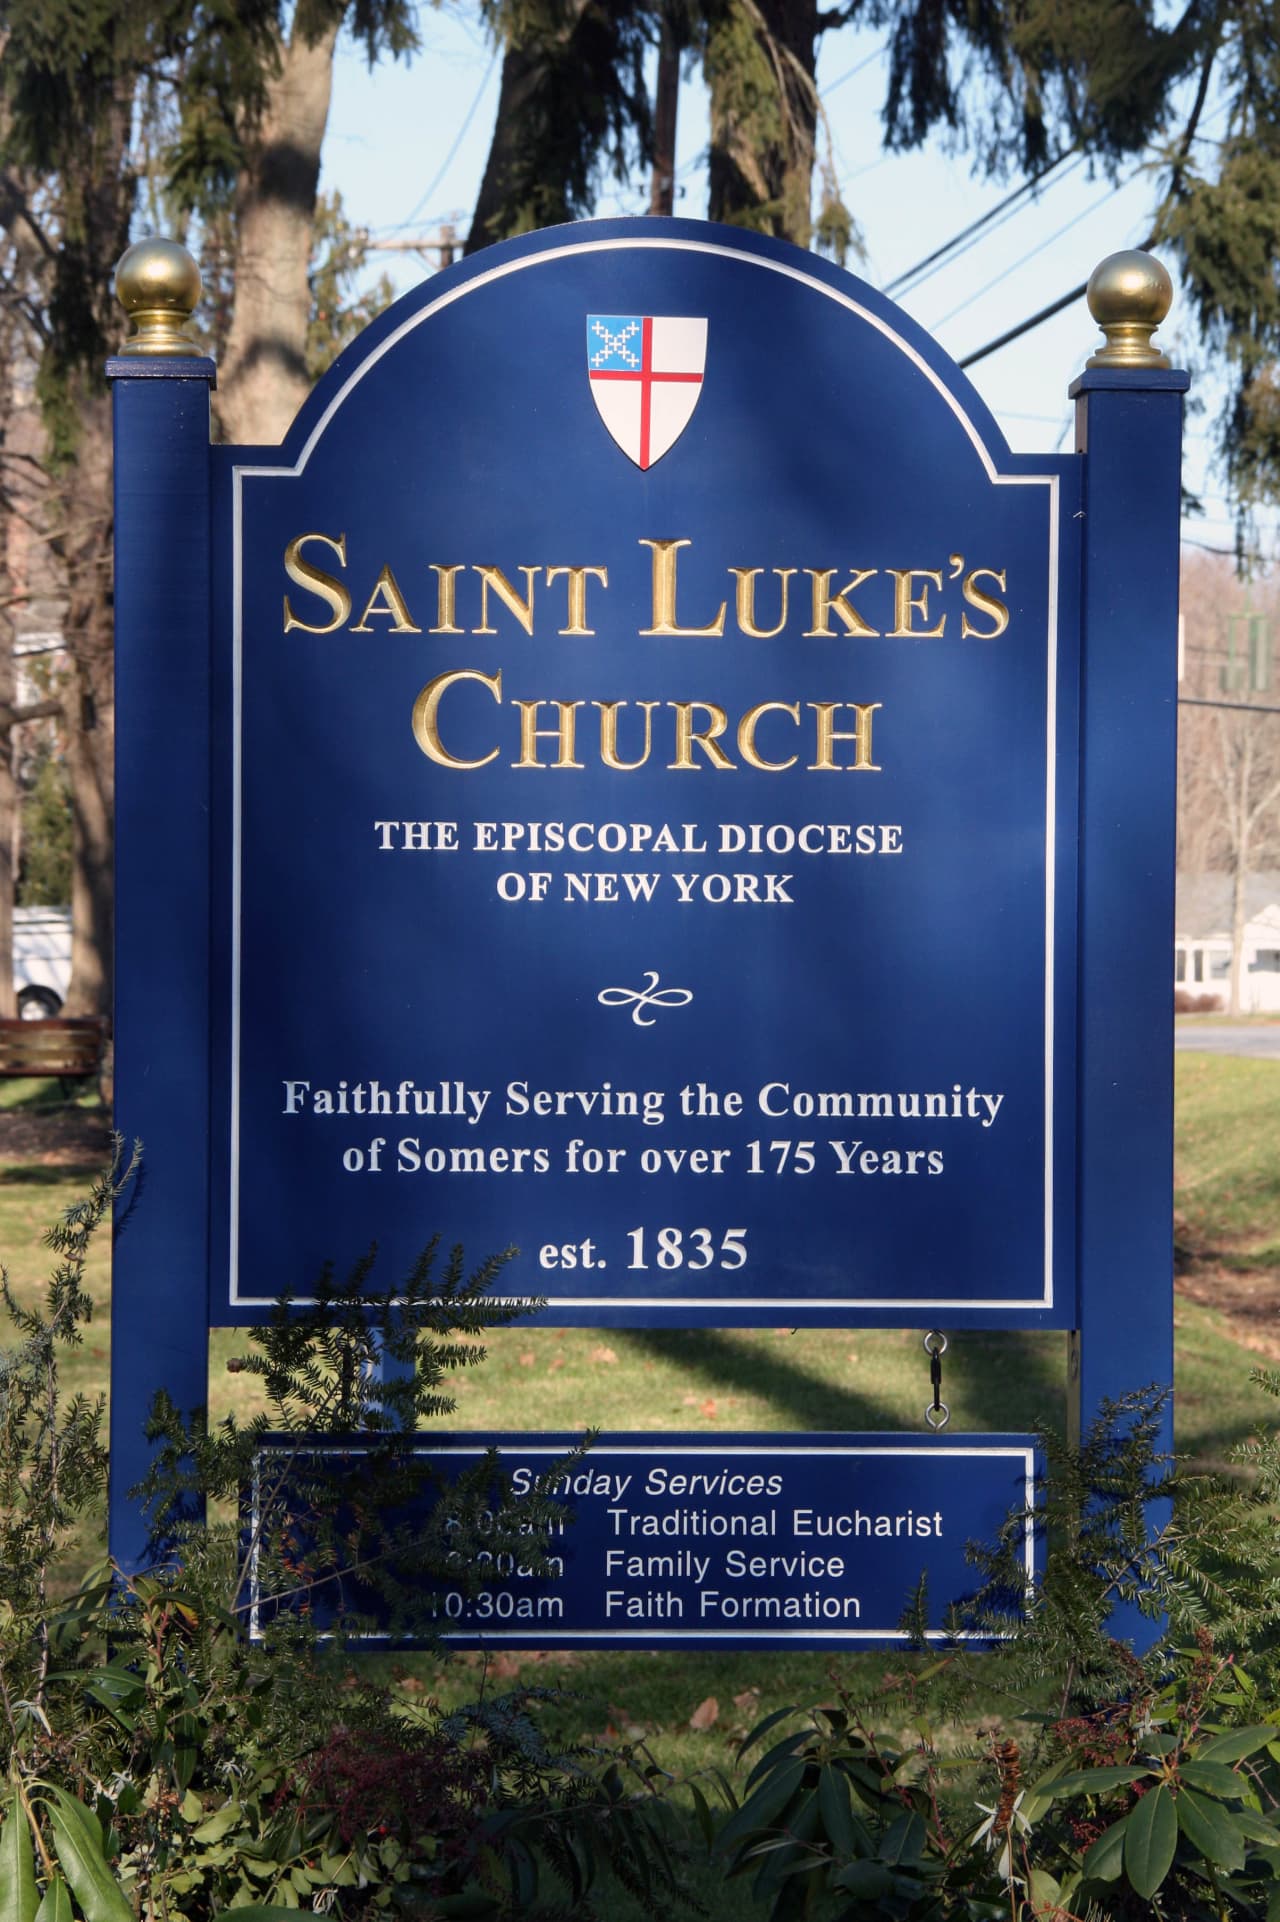 St. Luke's Episcopal Church is hosting its annual harvest festival and tag sale Saturday, Oct. 3, at Bailey Park in Somers.